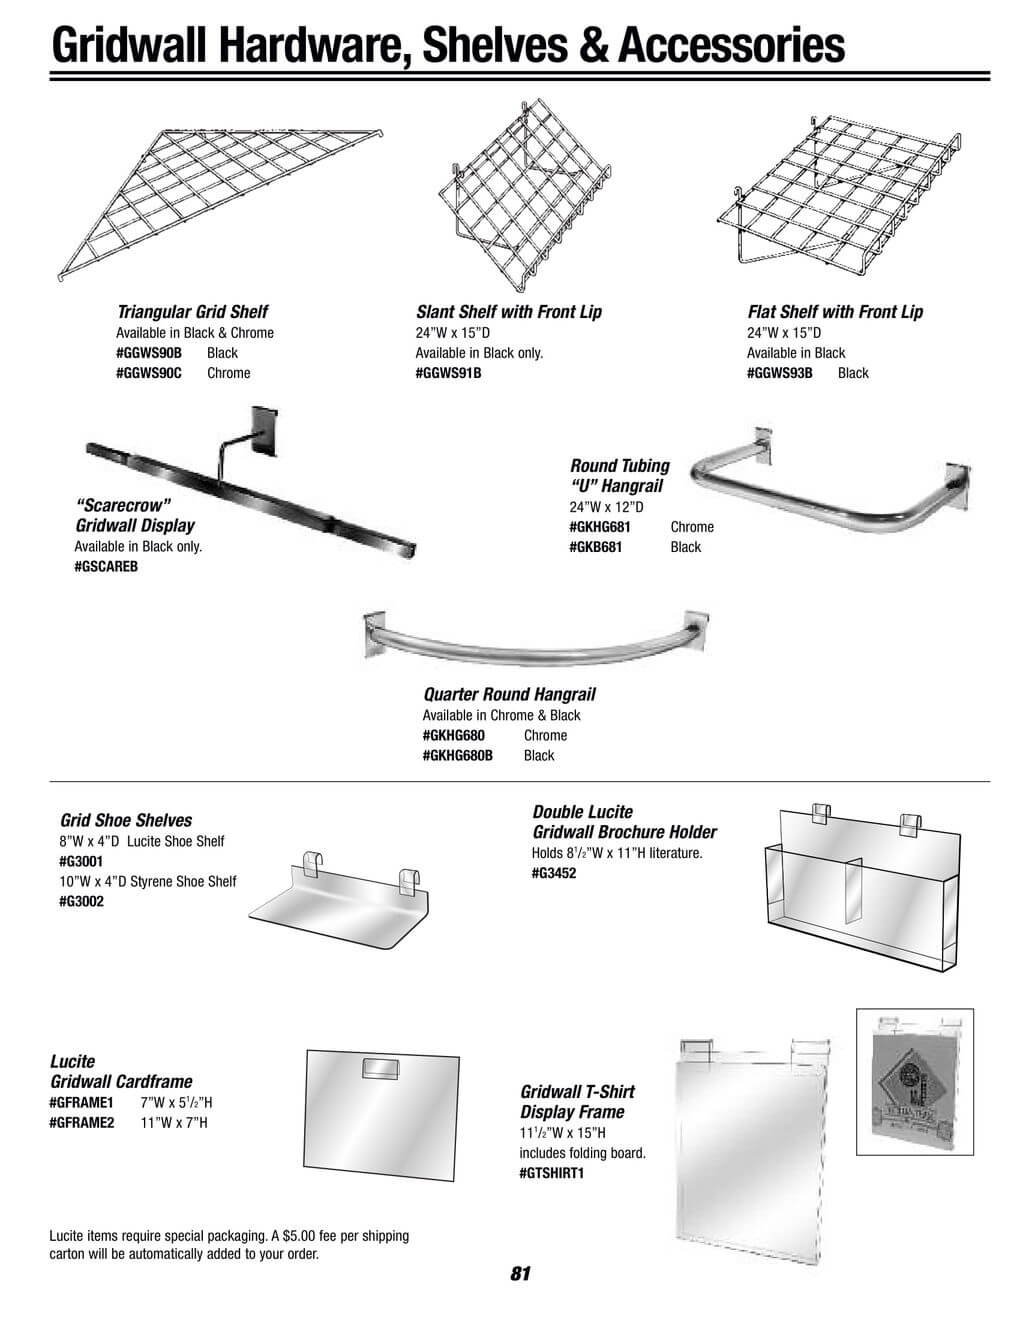 gridwall hardware, shelves and accessories